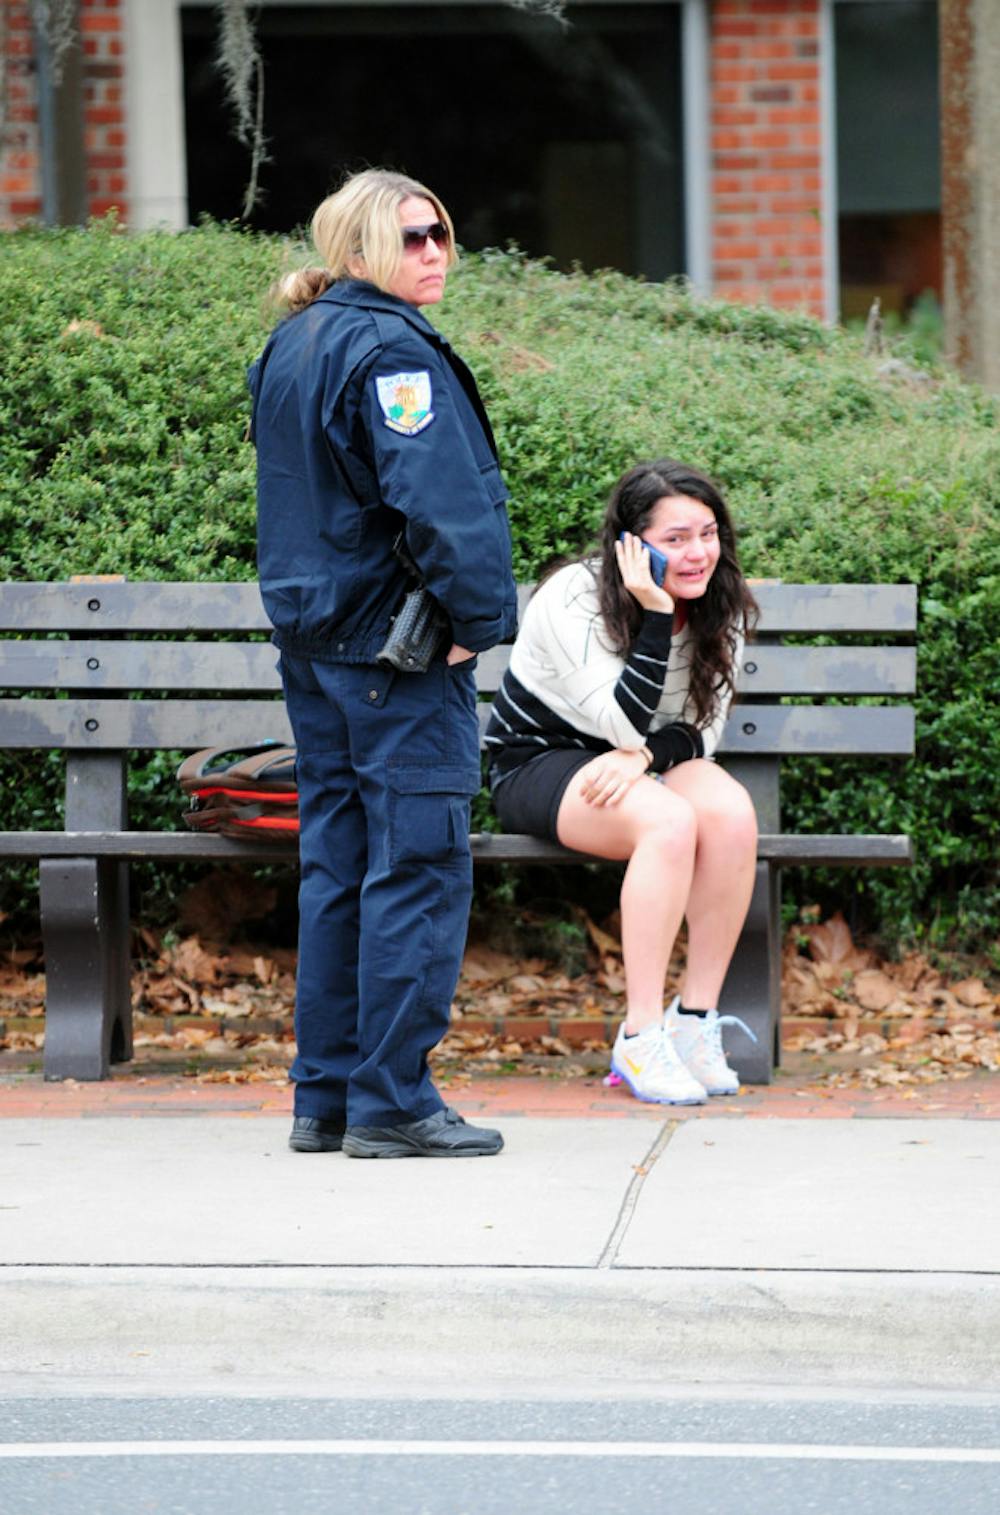 <p class="p1">Melanie Cabezas, a 21-year-old chemical engineering senior, talks on the phone Thursday evening after getting hit by a Route 38 RTS bus near the Hub.</p>